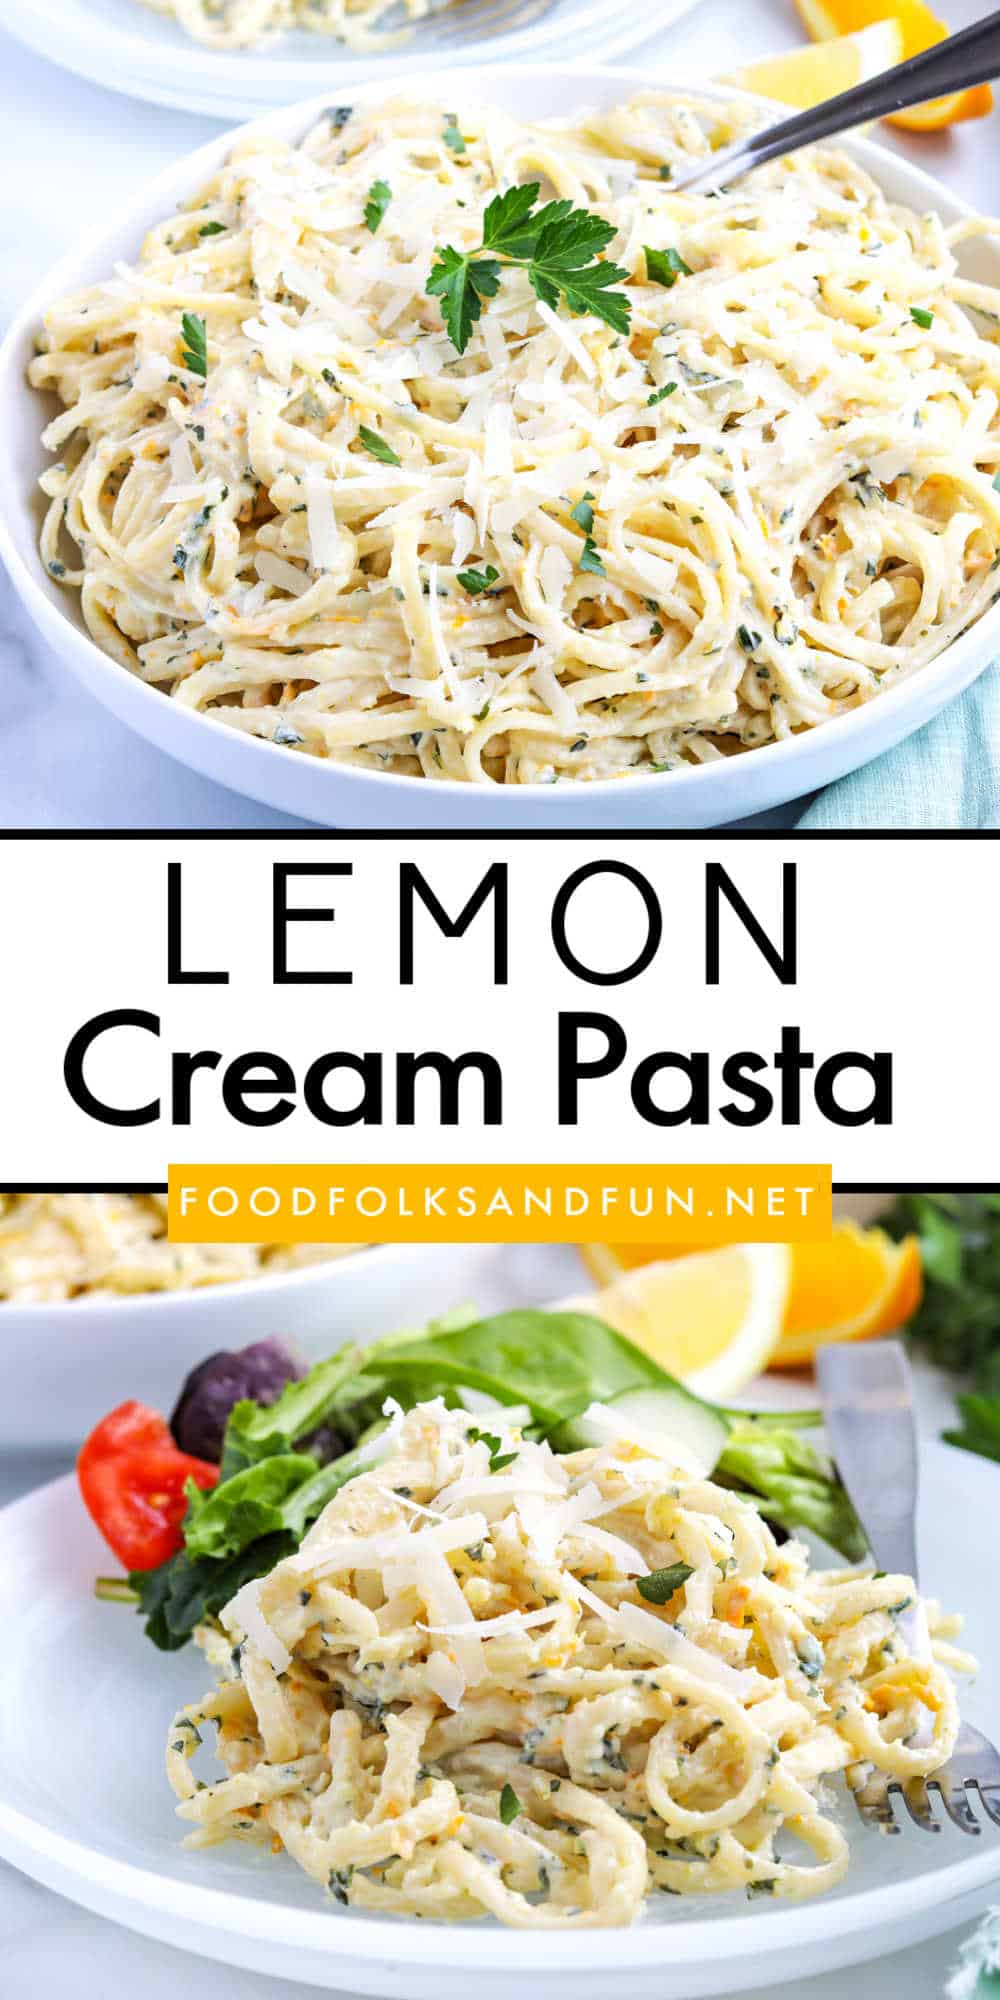 This citrus cream pasta recipe is an easy, refreshing dinner that takes just 15 minutes! It’s a great dish for busy weeknights.
 via @foodfolksandfun